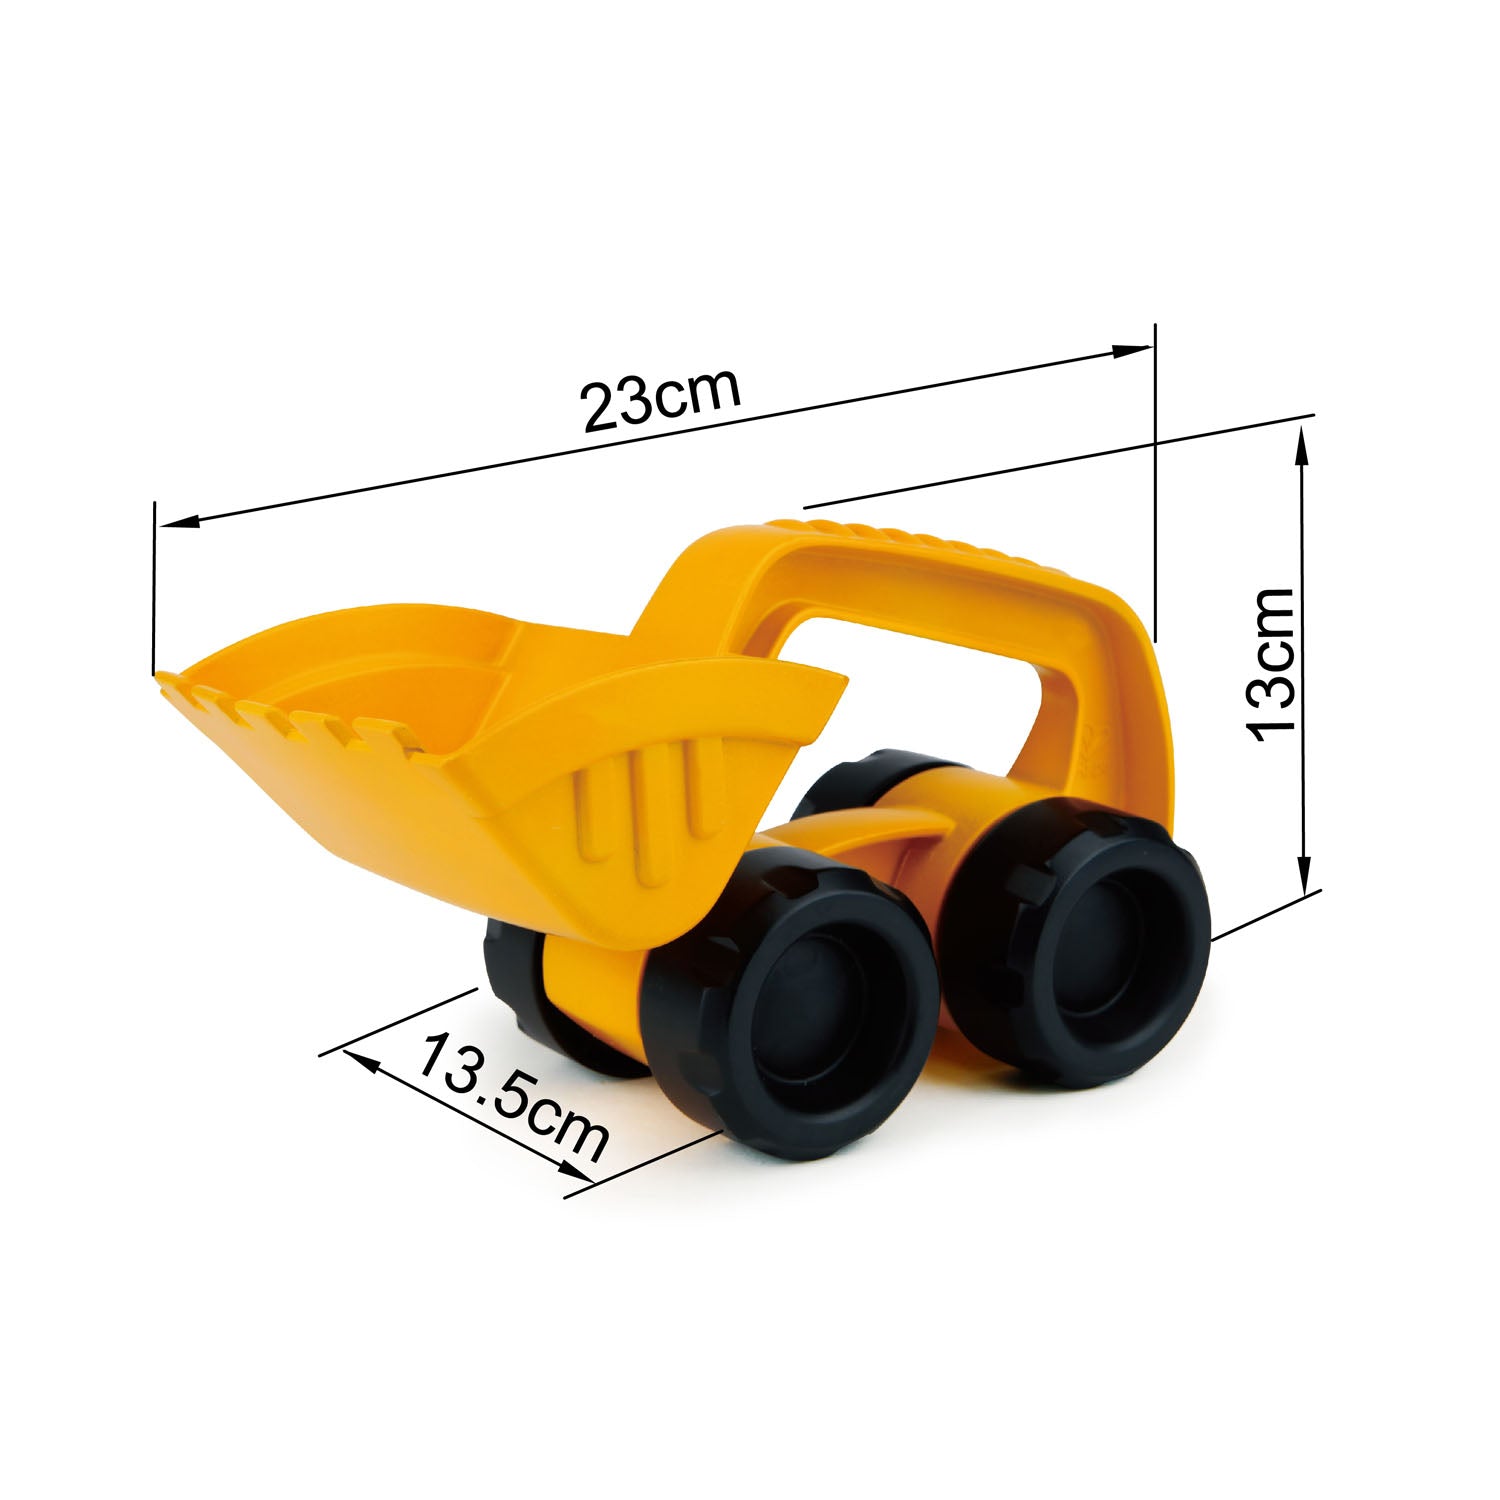 Hape Monster Digger perfect for the sand or backyard play with quality outdoor toys The Toy Wagon